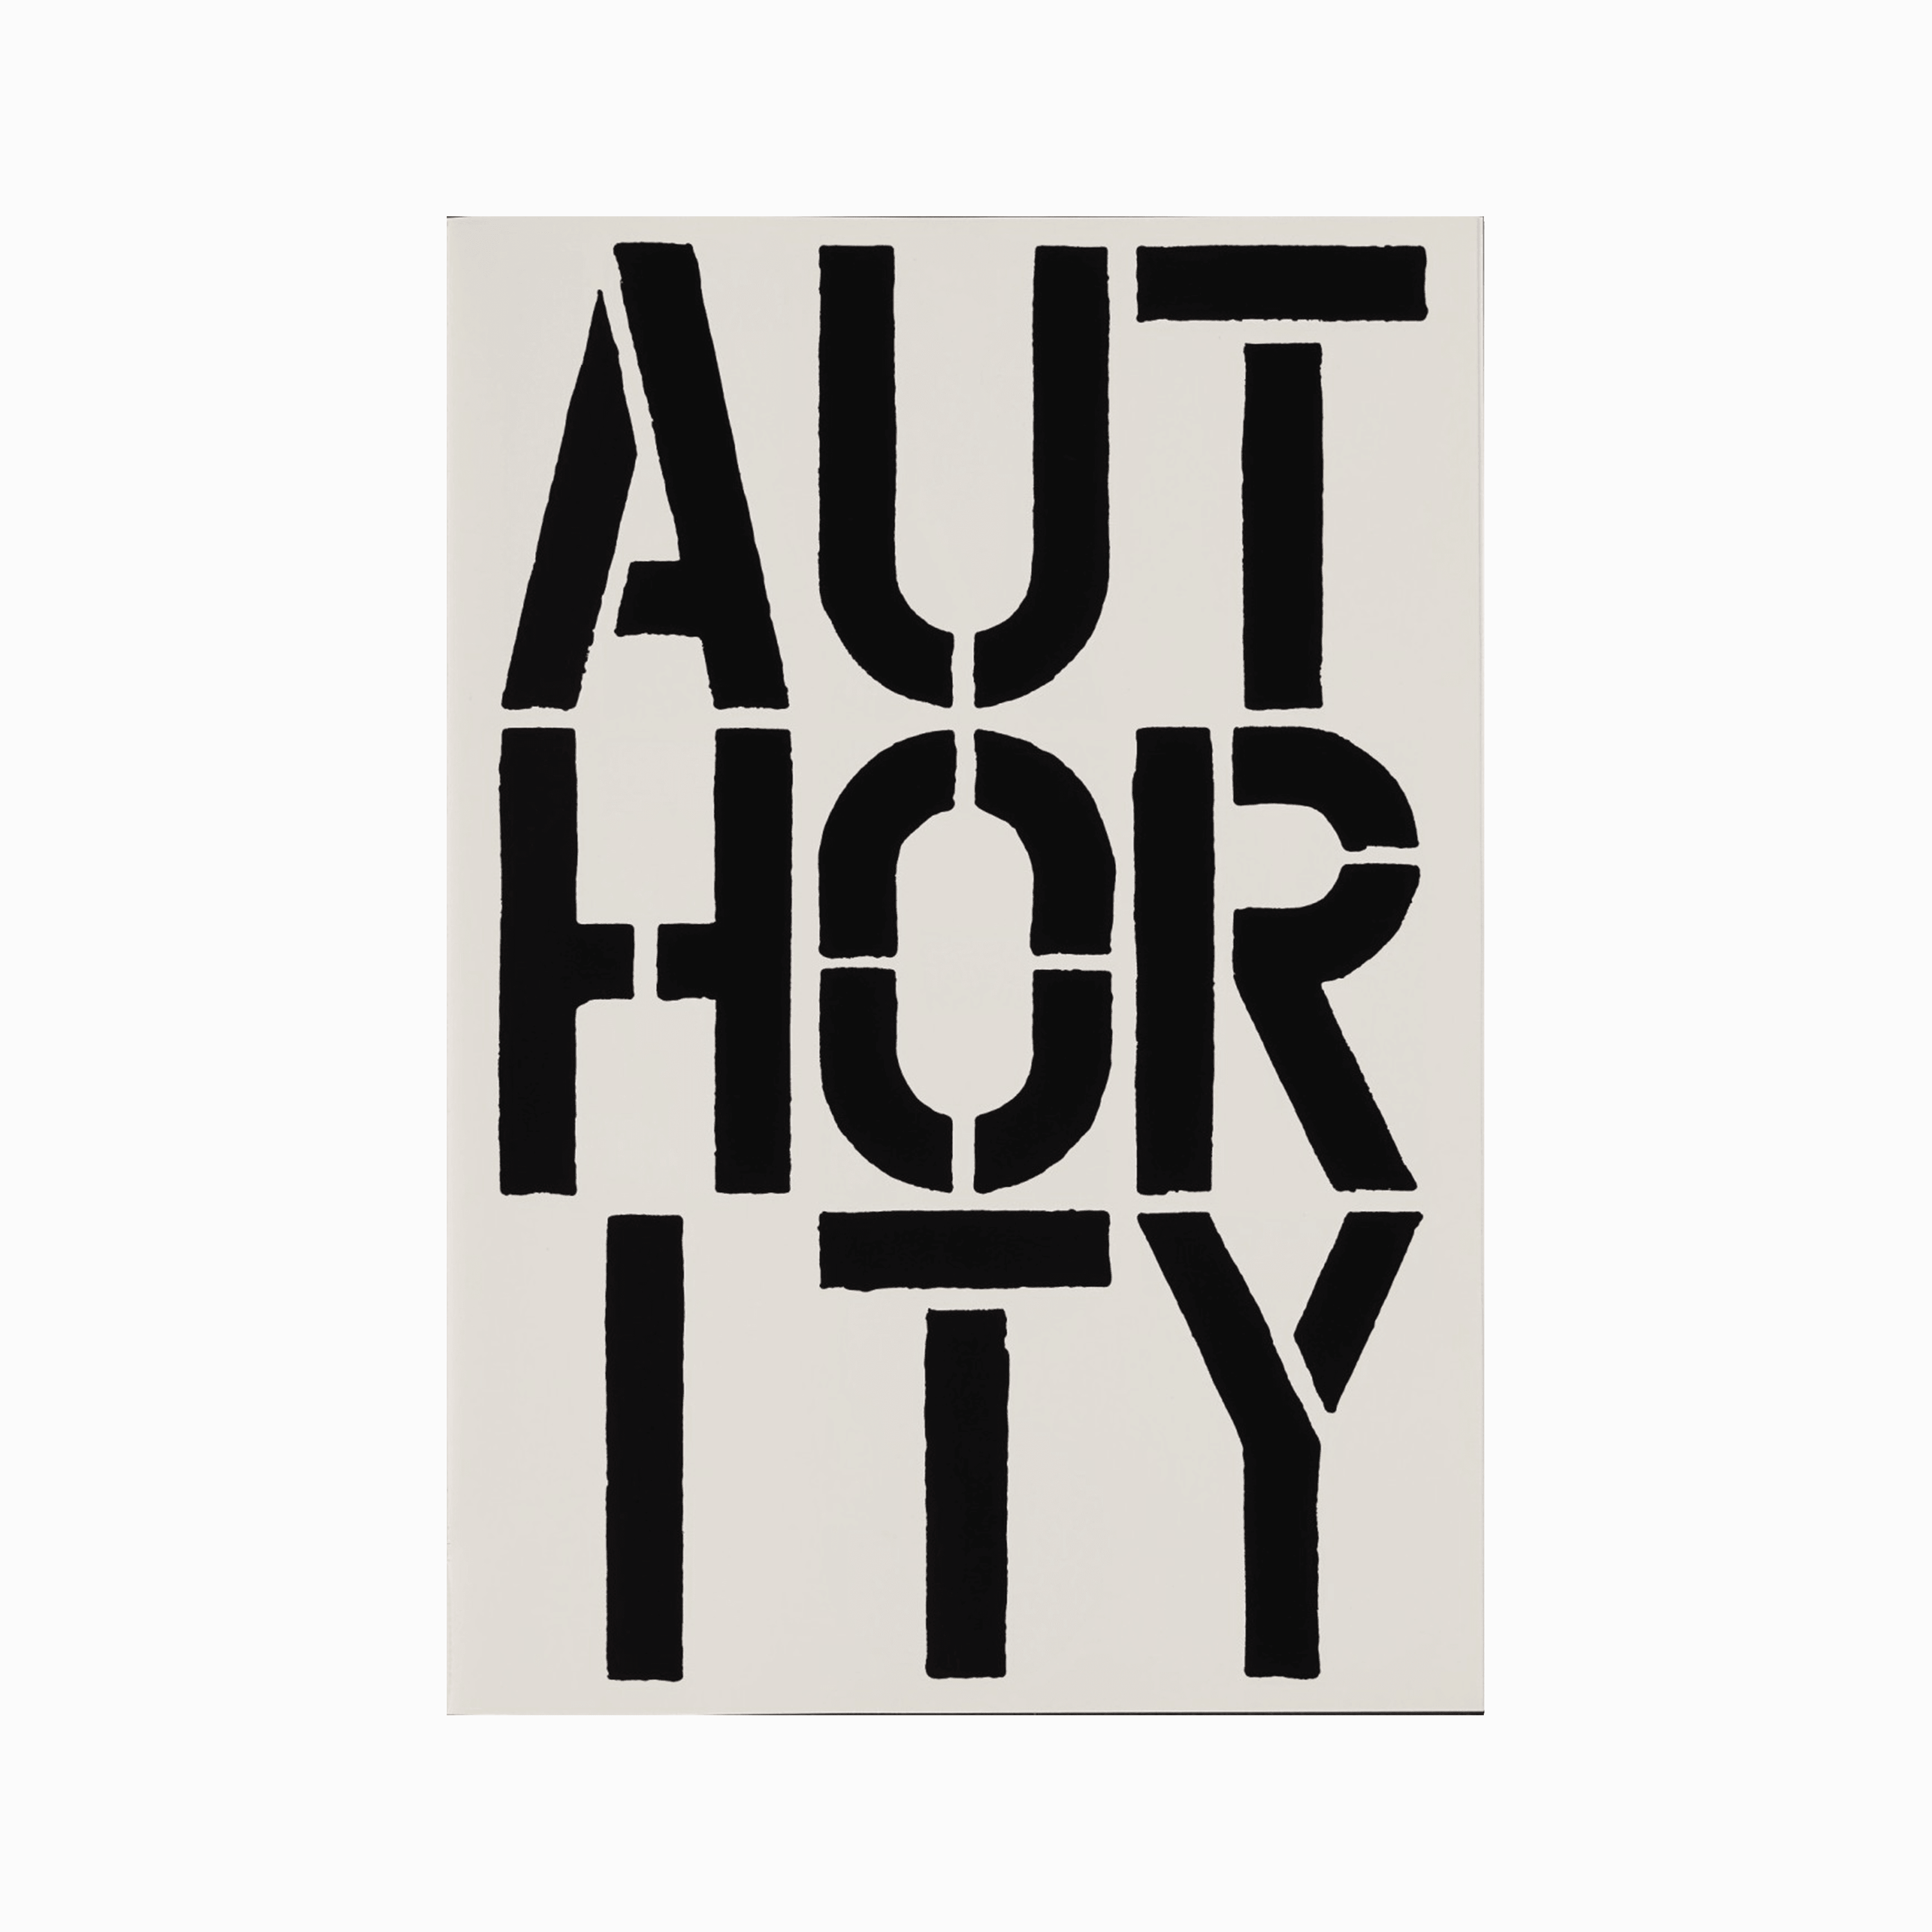 Authority (page from Black Book) - CommodityGallery